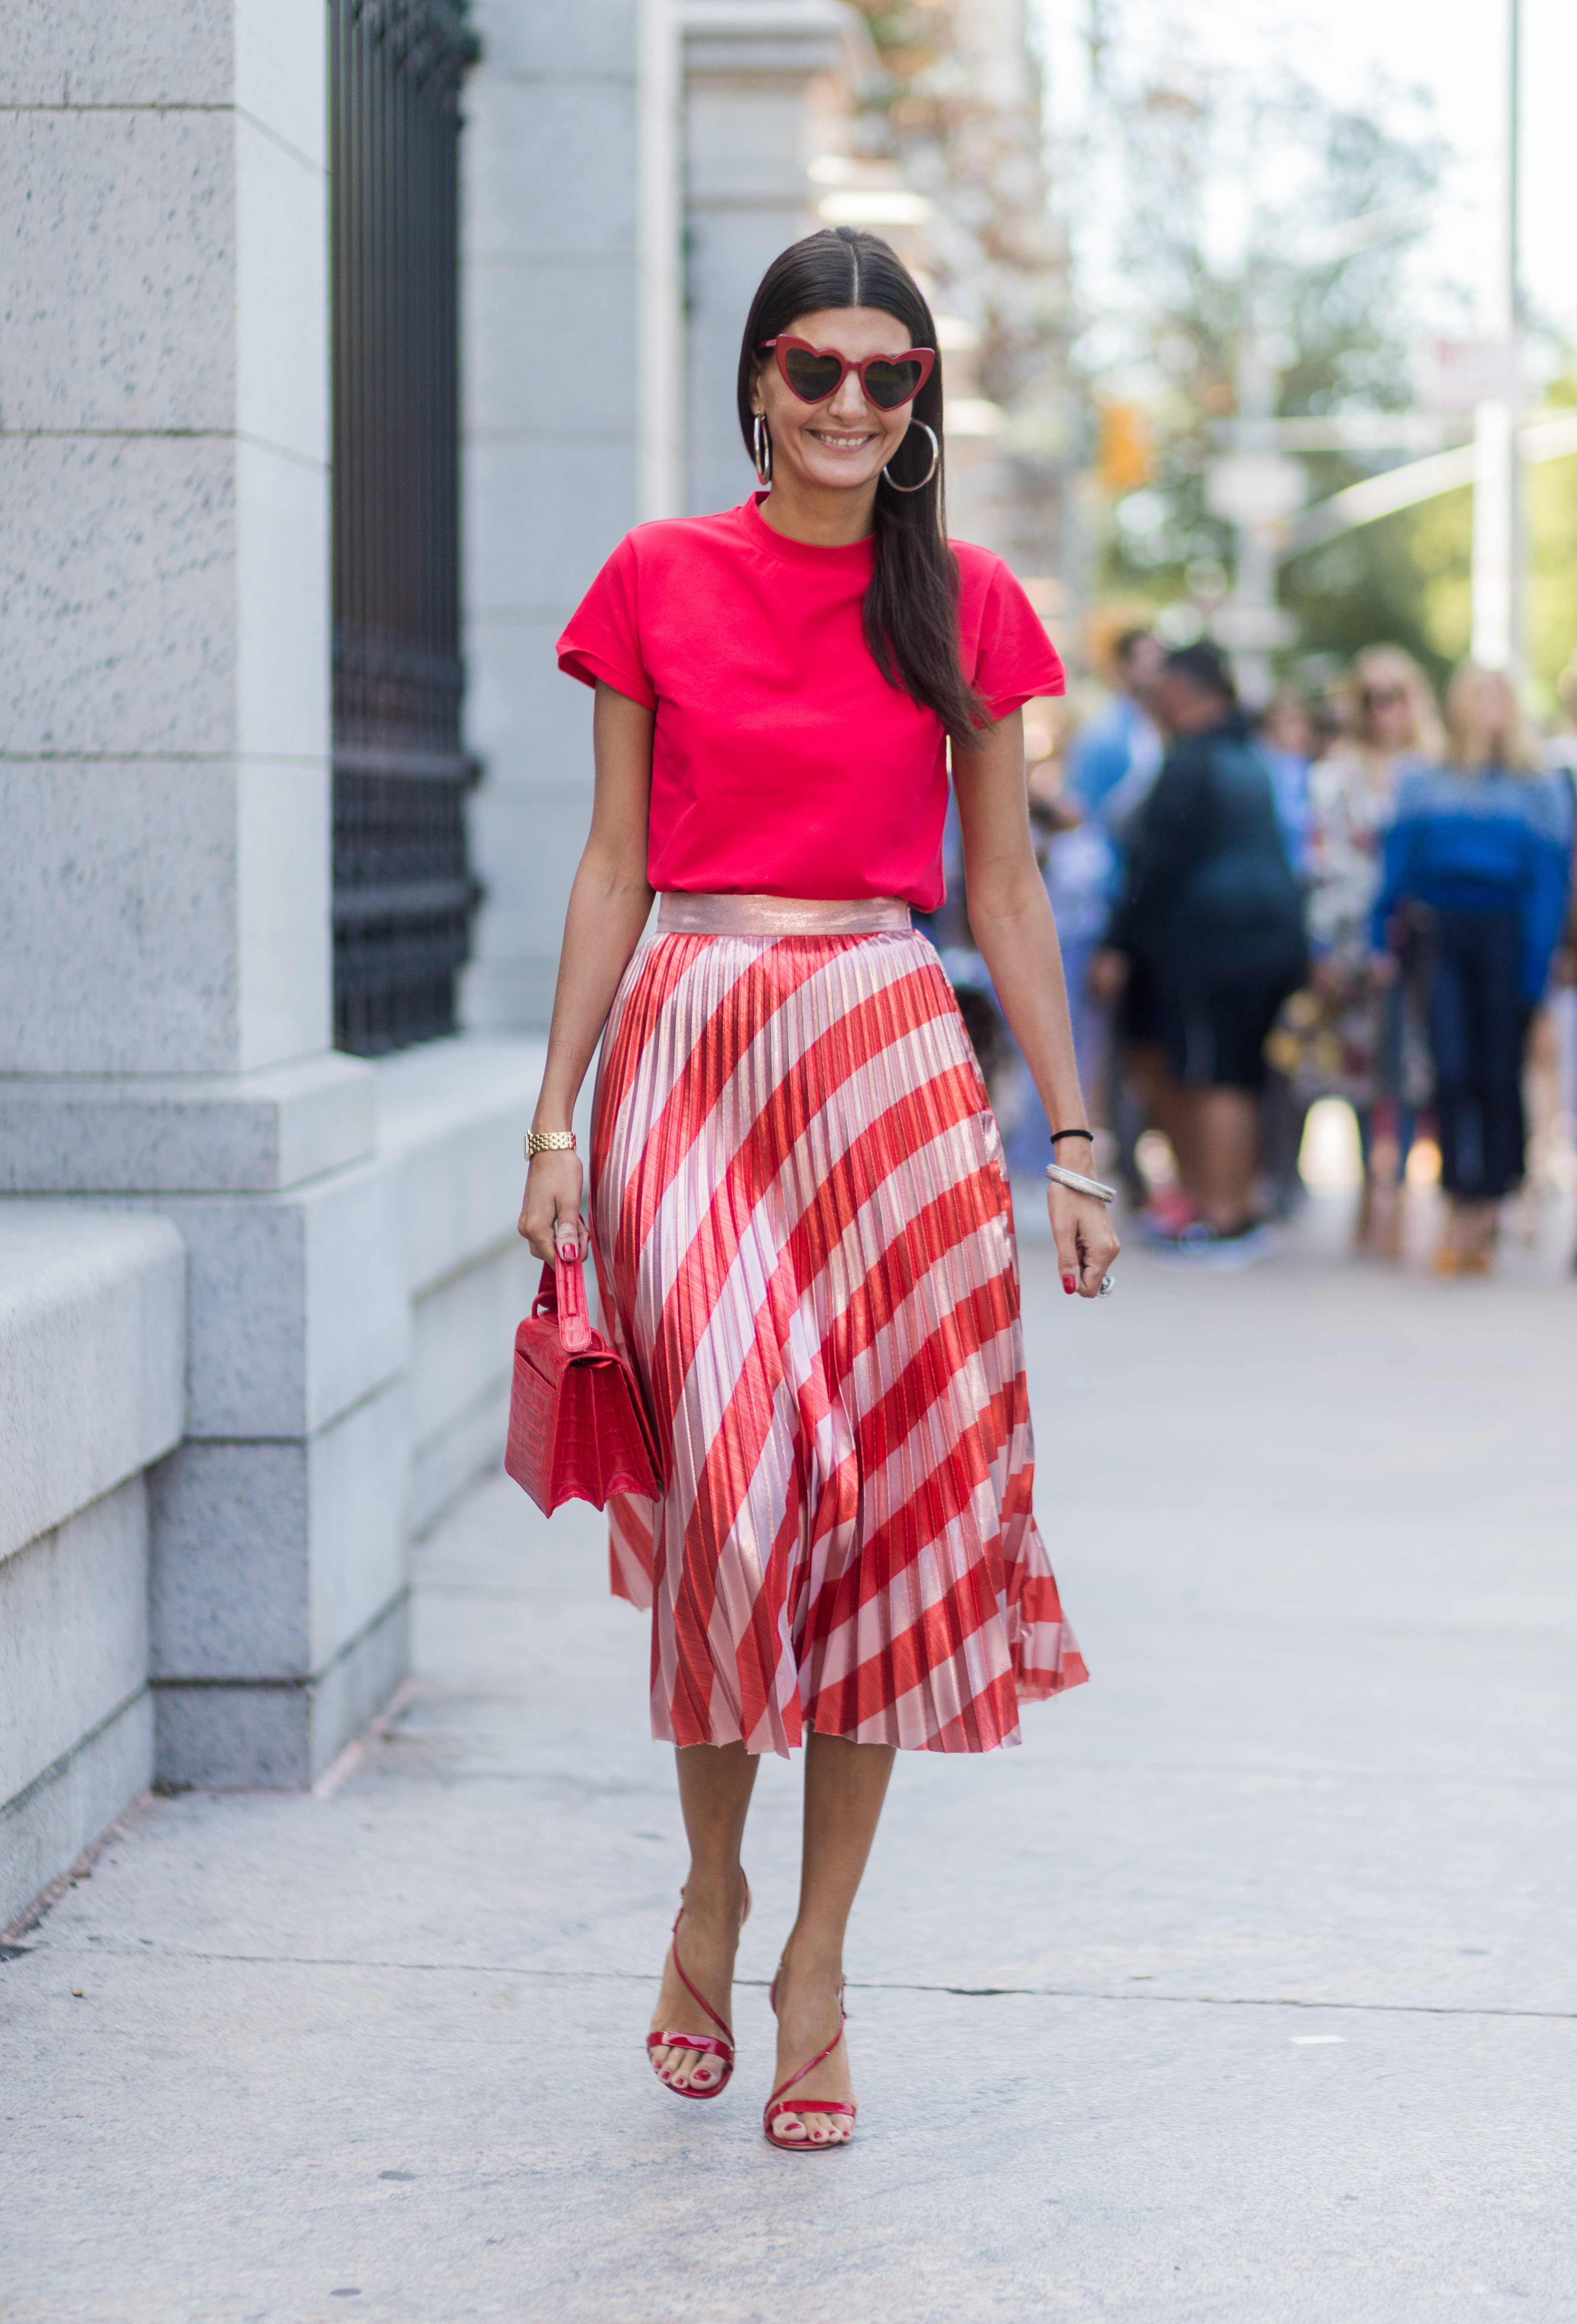 Our Editors' Style Muses: 4 Can't-Miss Summer Looks